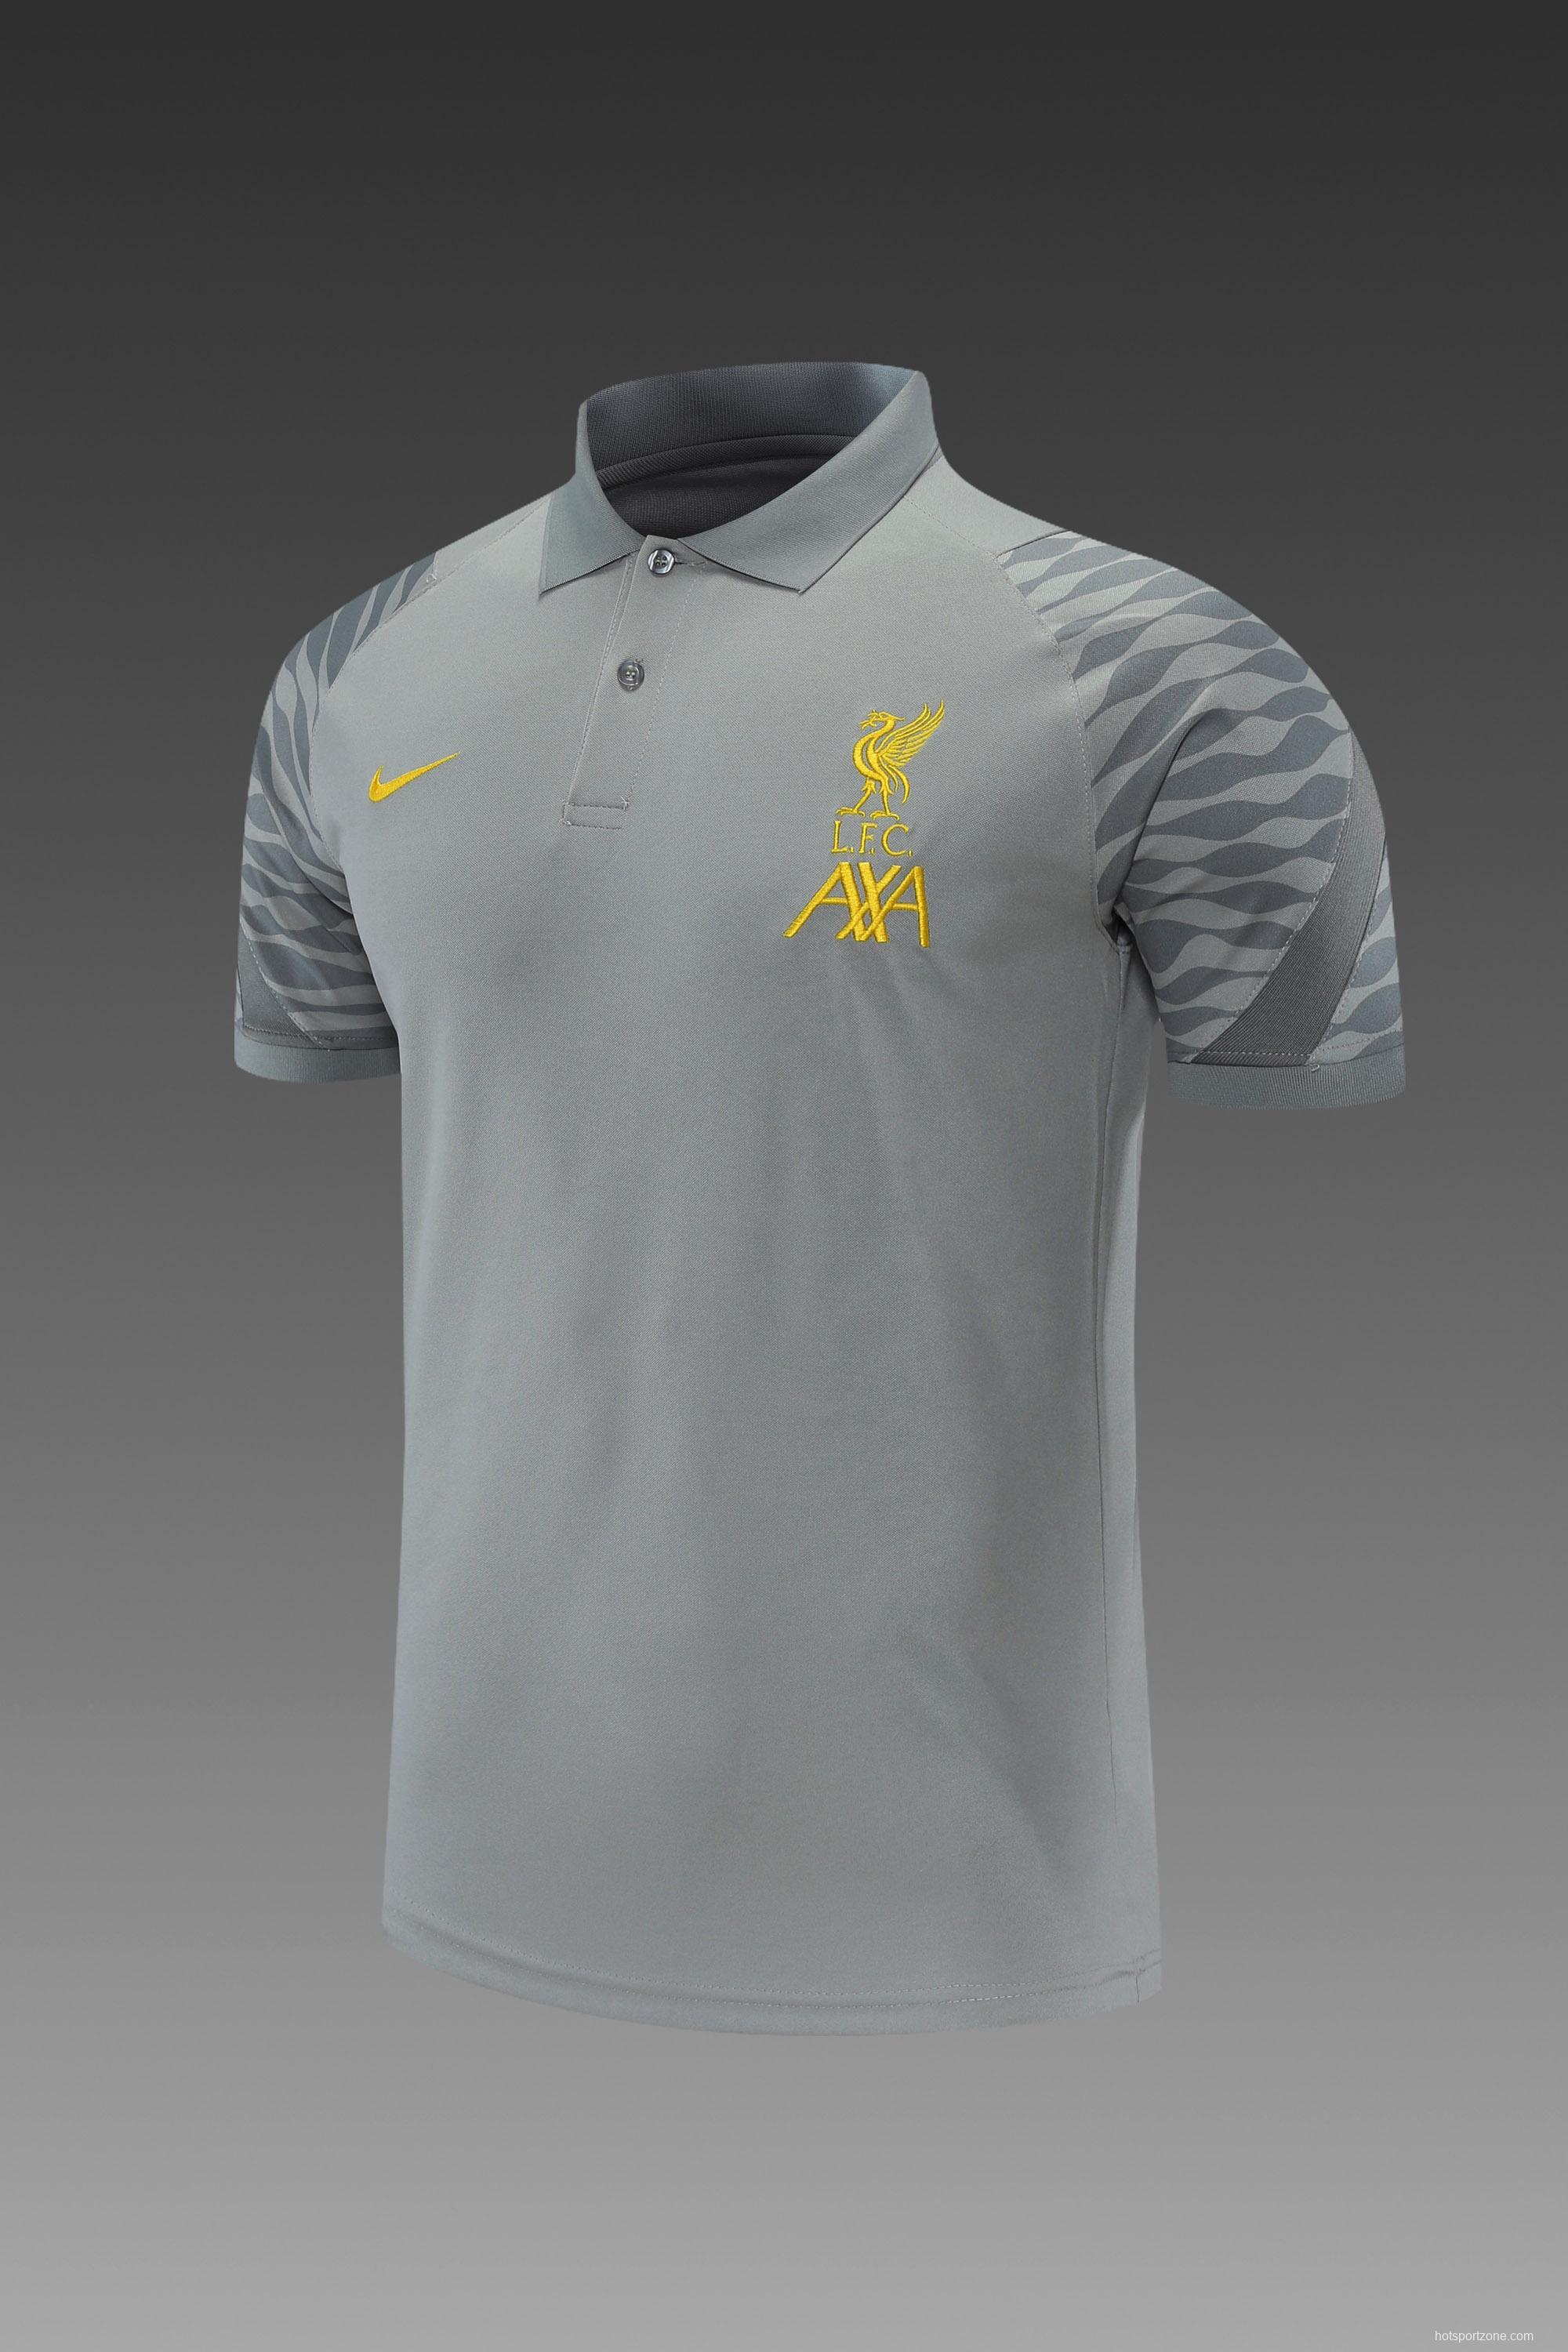 Liverpool POLO kit Dark Grey(not supported to be sold separately)